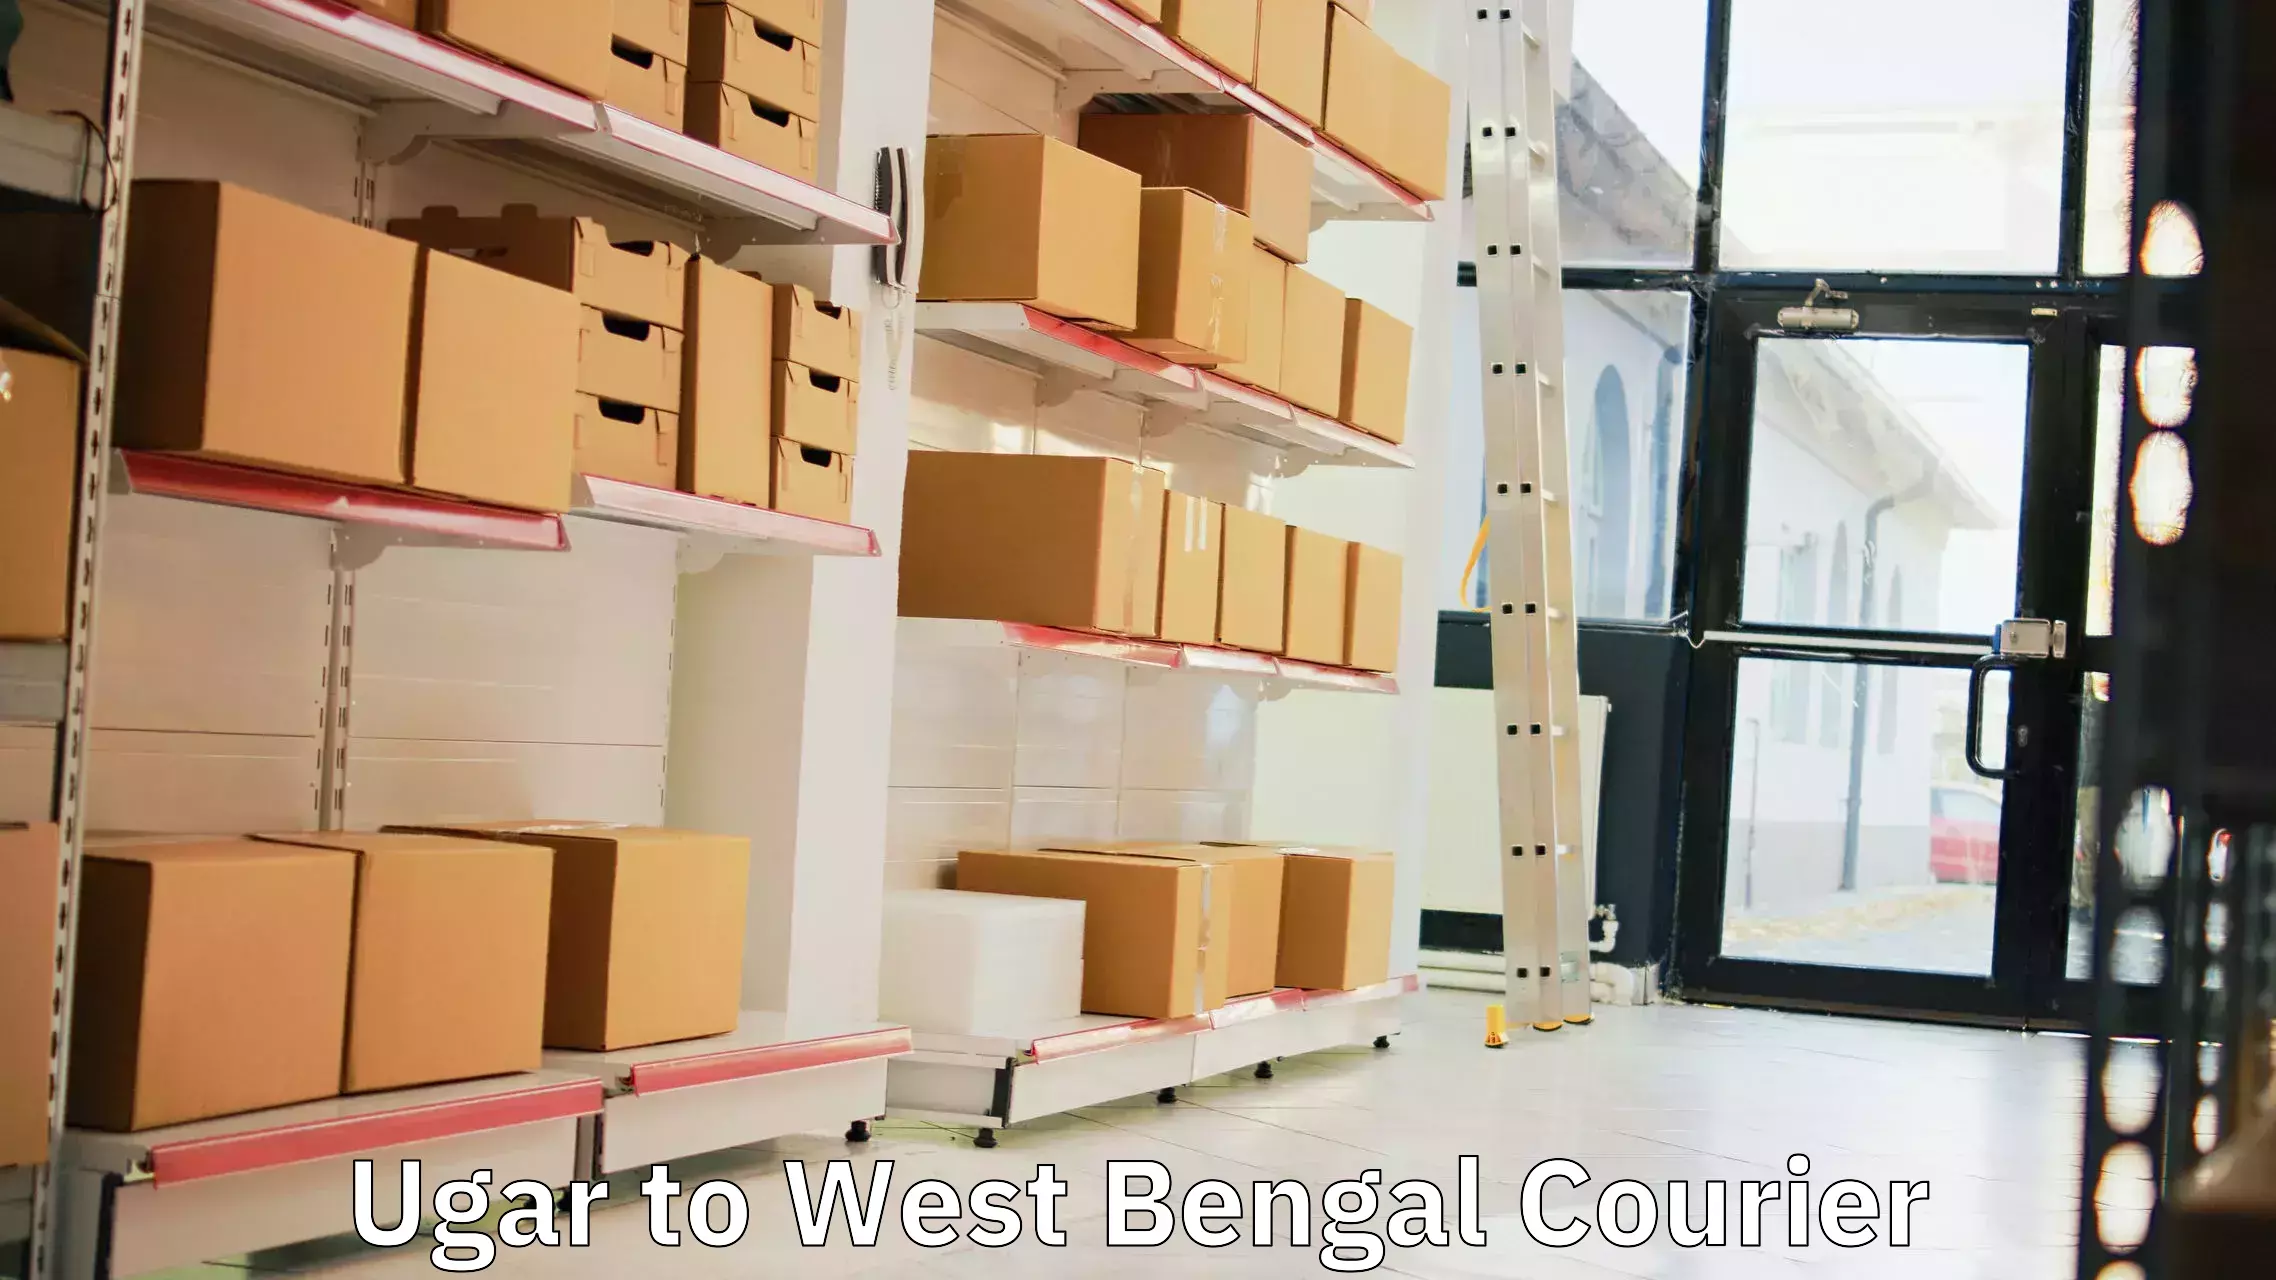 Seamless shipping experience Ugar to West Bengal